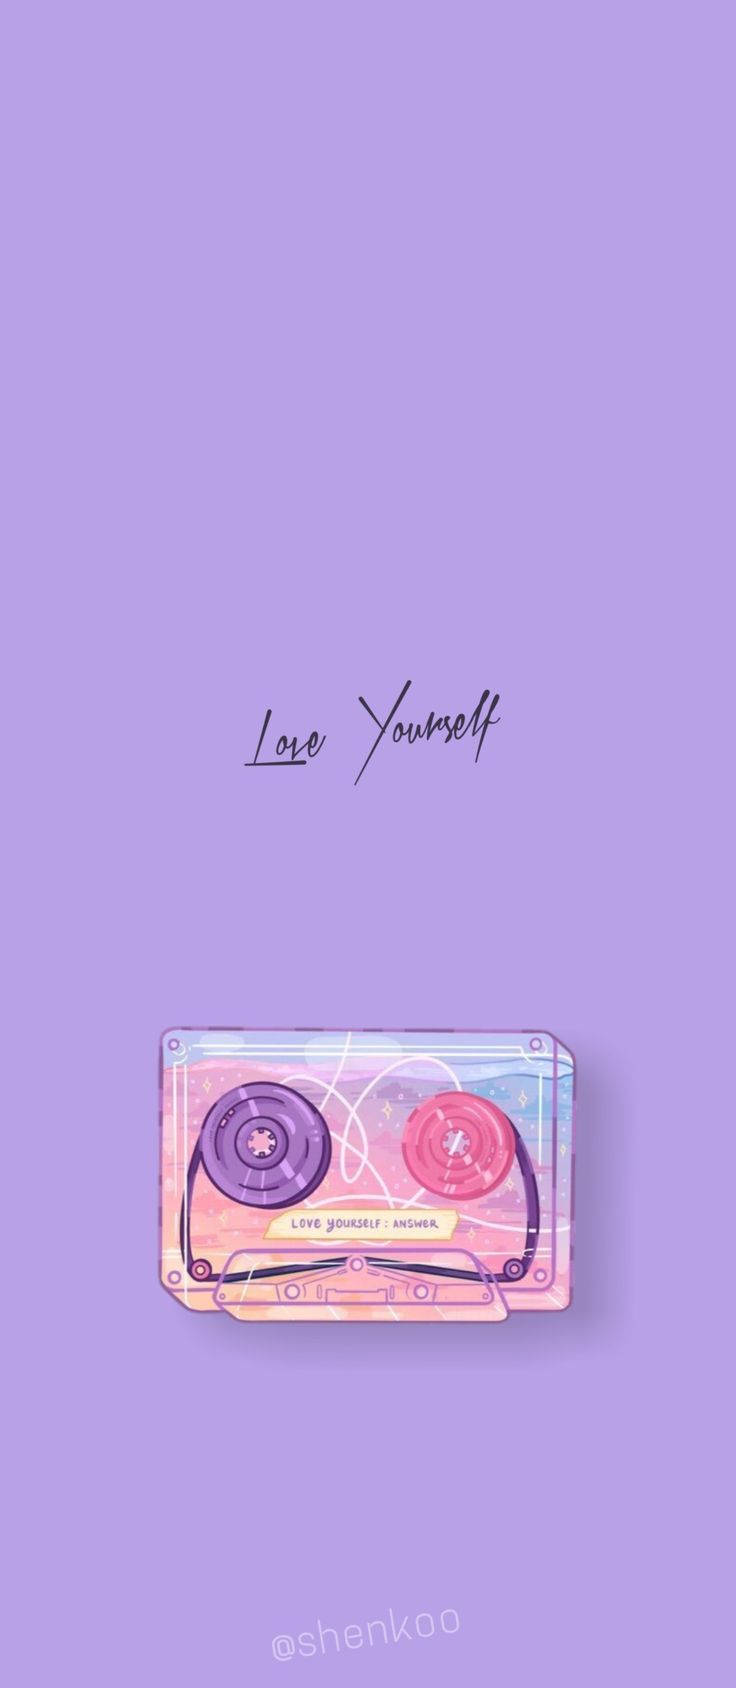 Bts Aesthetic Love Yourself Cassette Tape Background